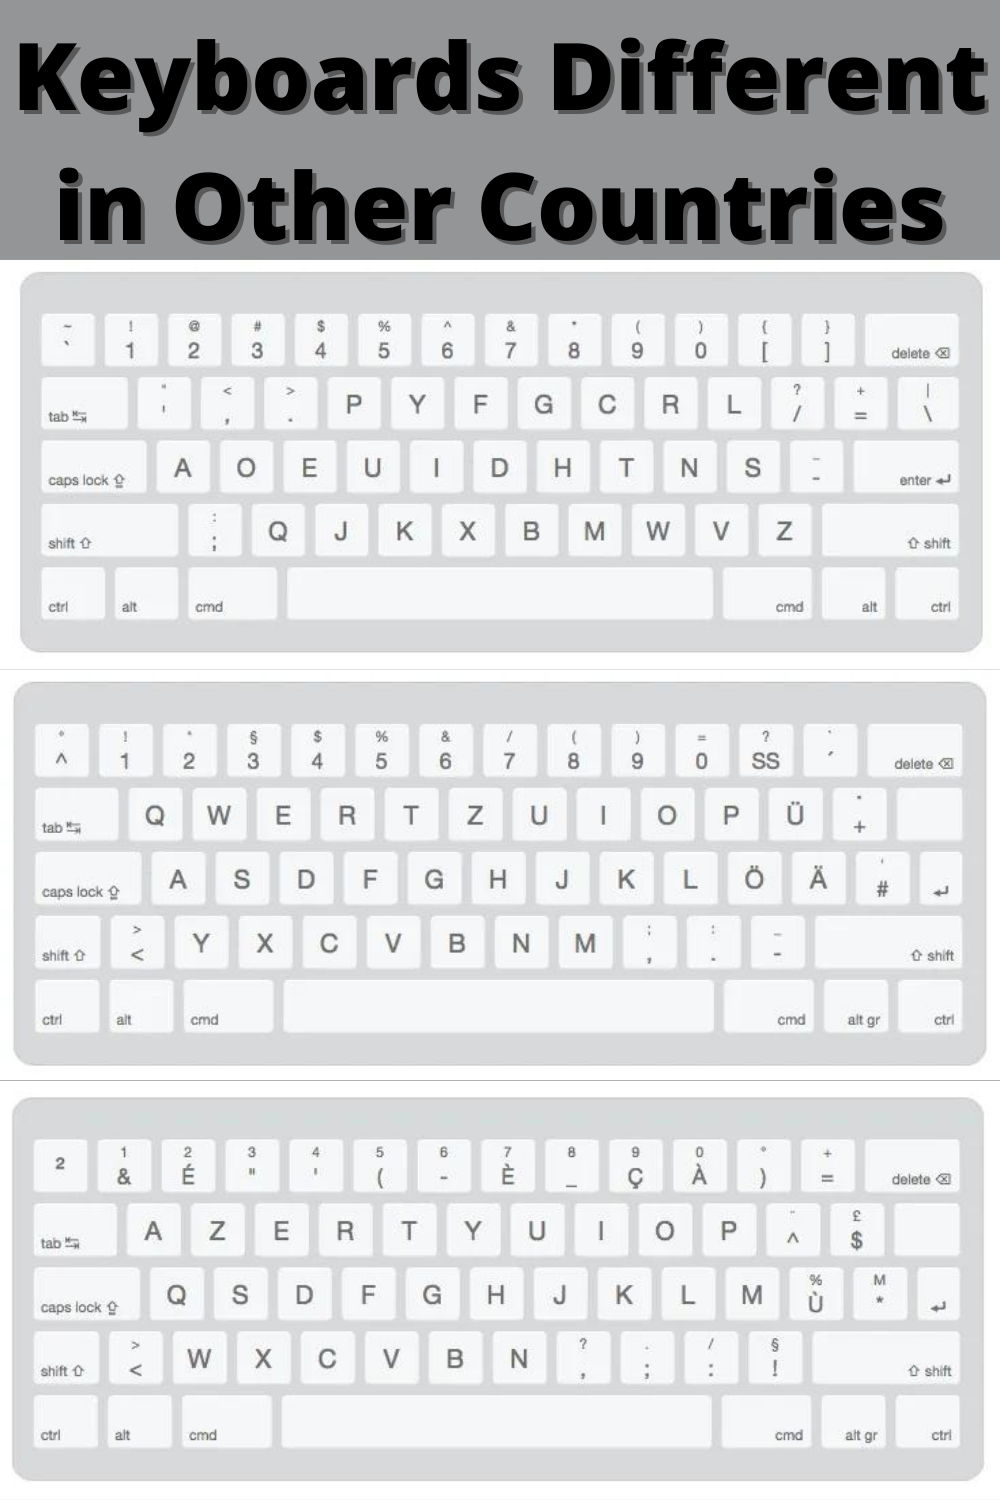 Are Keyboards Different in Other Countries?